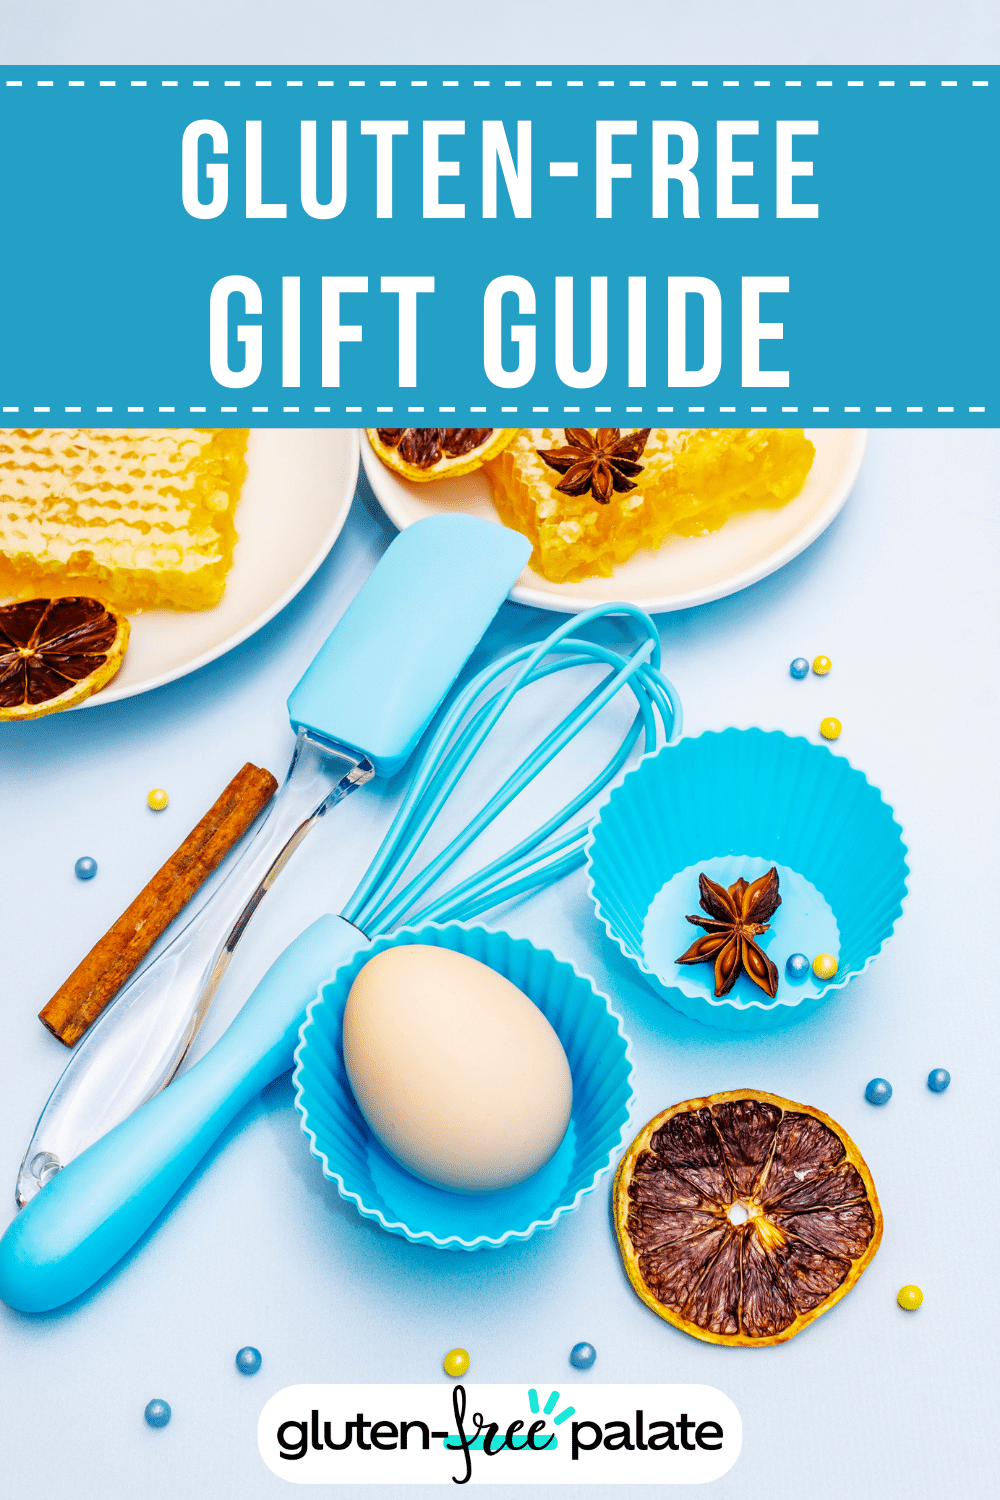 An image for a gluten-free gift guide.